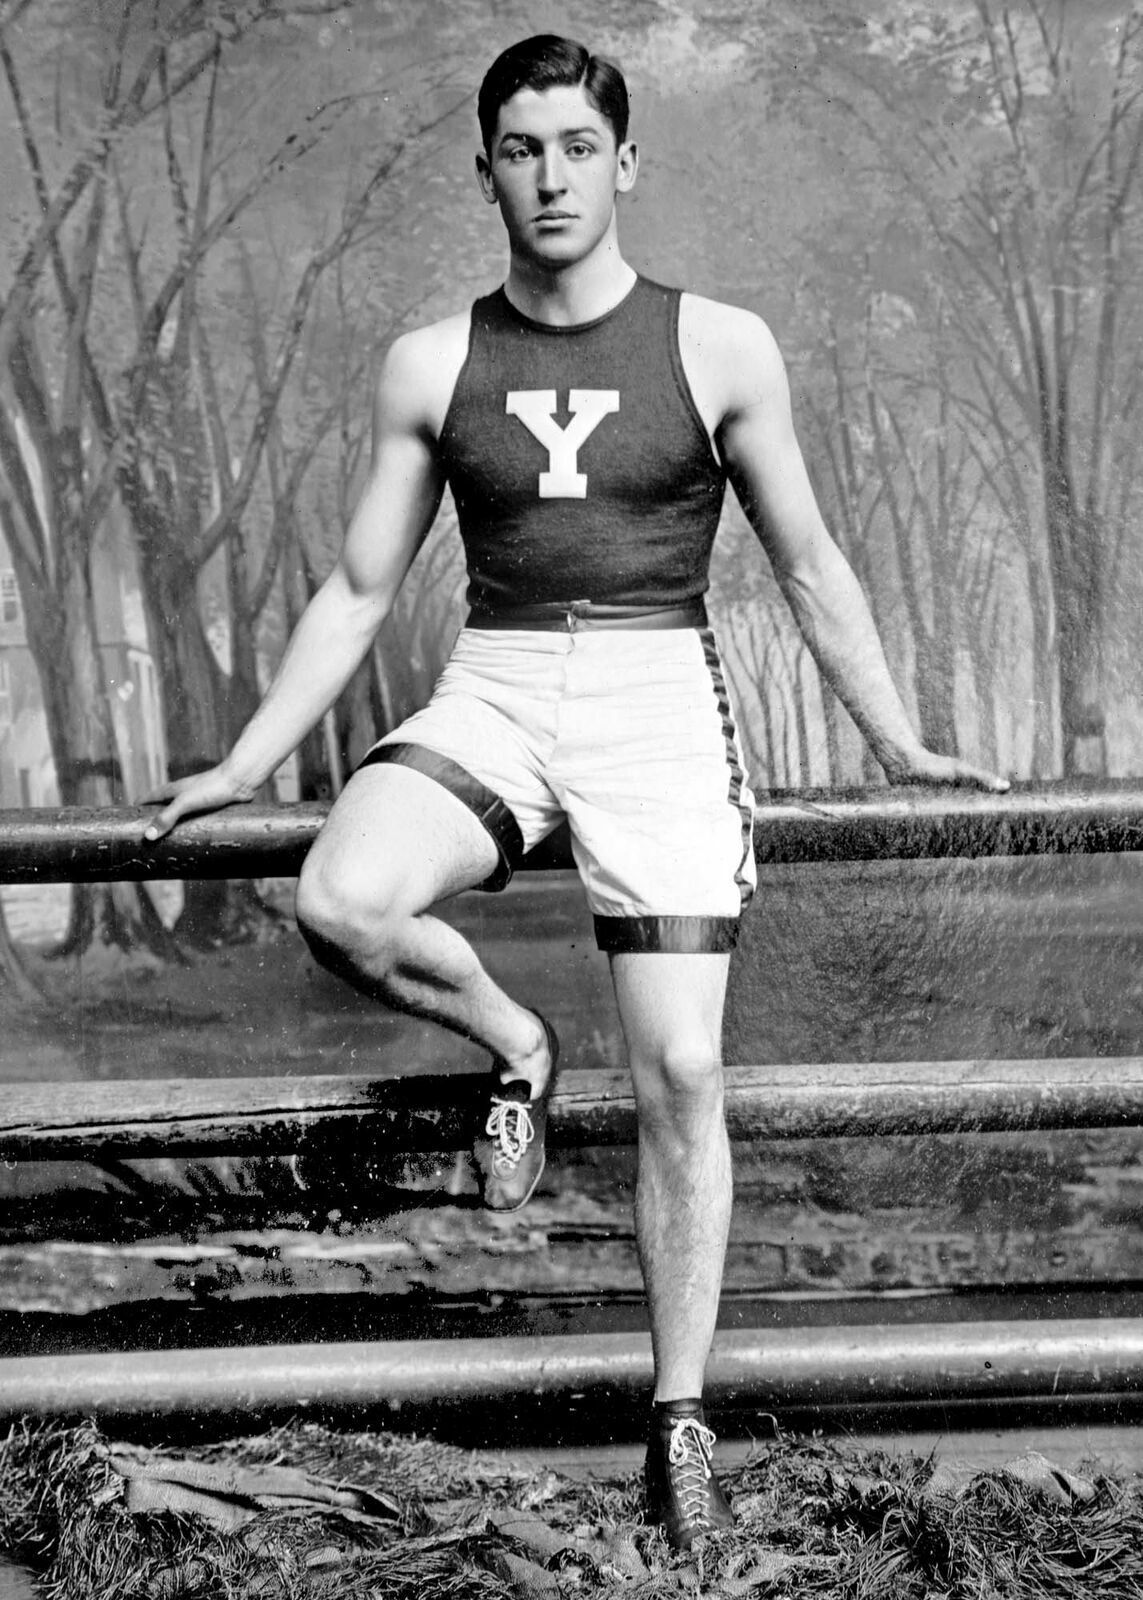 1908 Captain Dray Yale Relay Team Vintage Old Athlete Photo 4\